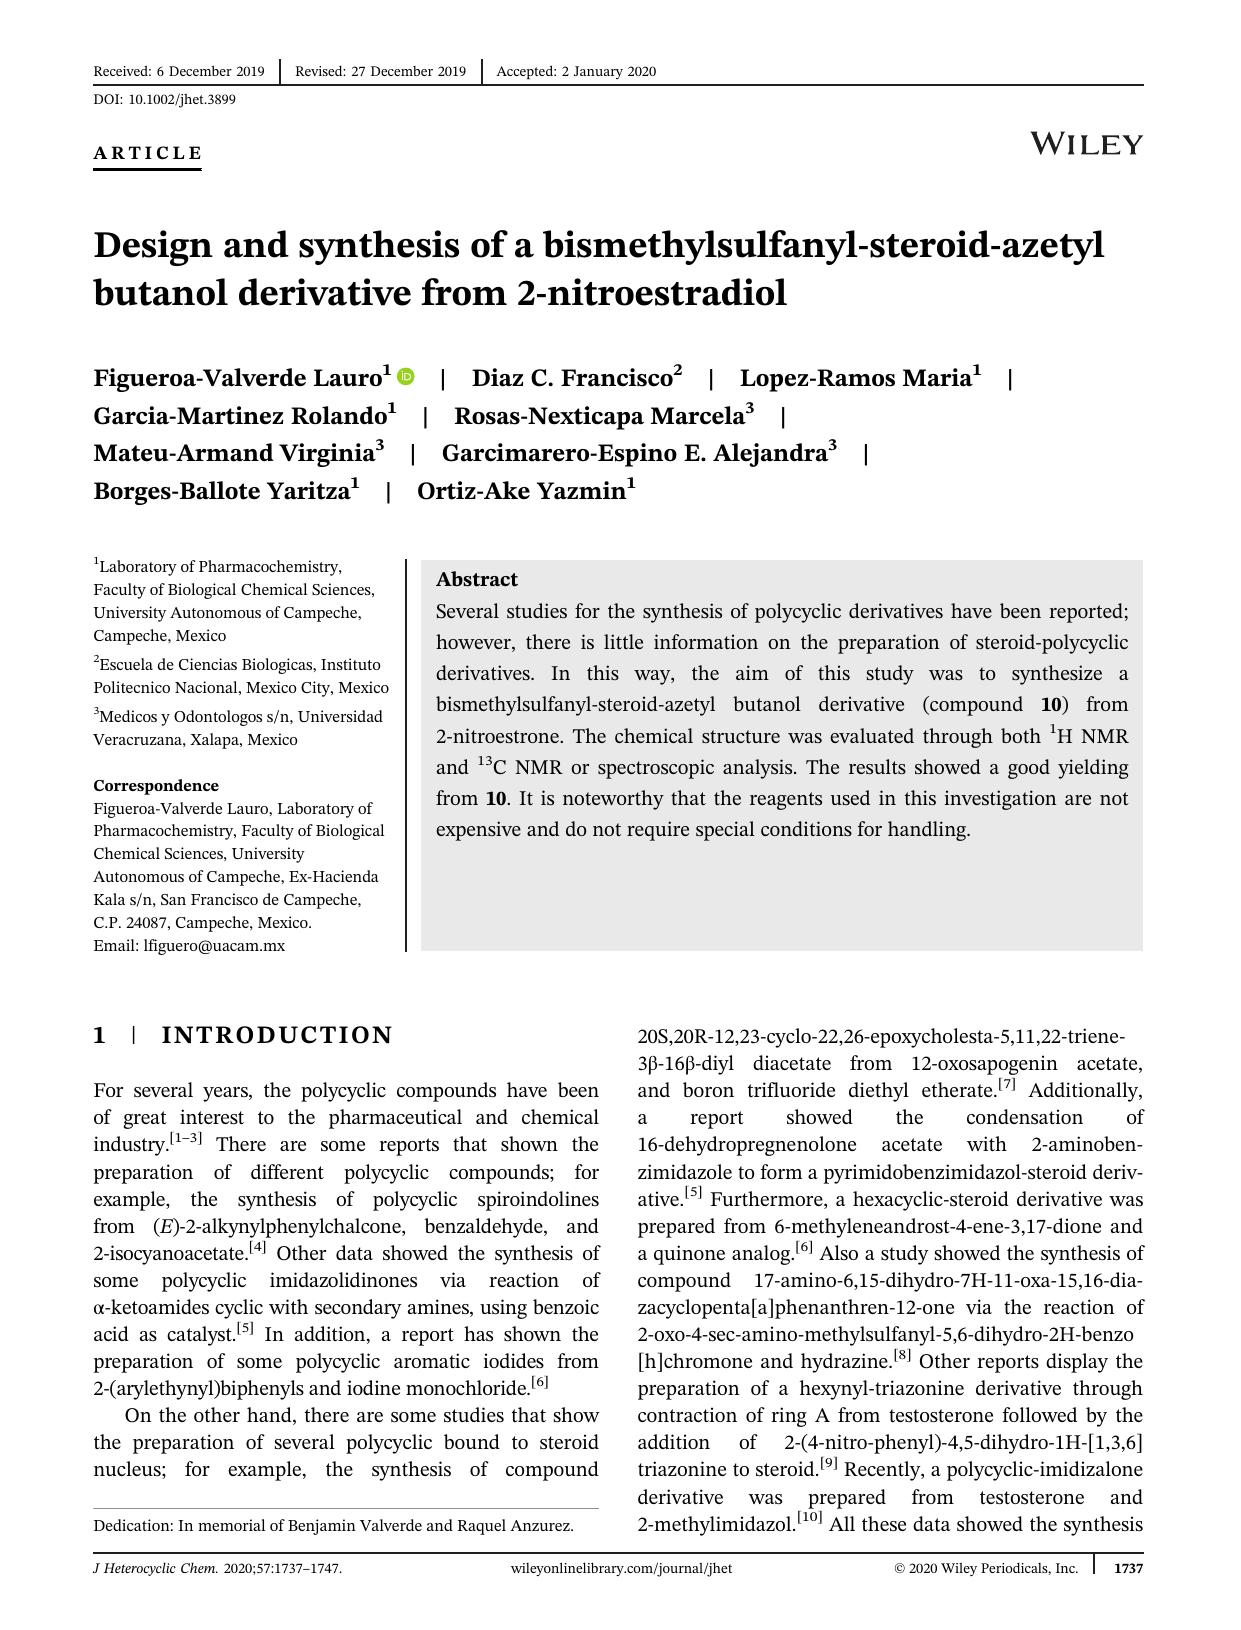 Design and synthesis of a bismethylsulfanyl-steroid-azetyl butanol derivative from 2-nitroestradiol. by Unknown